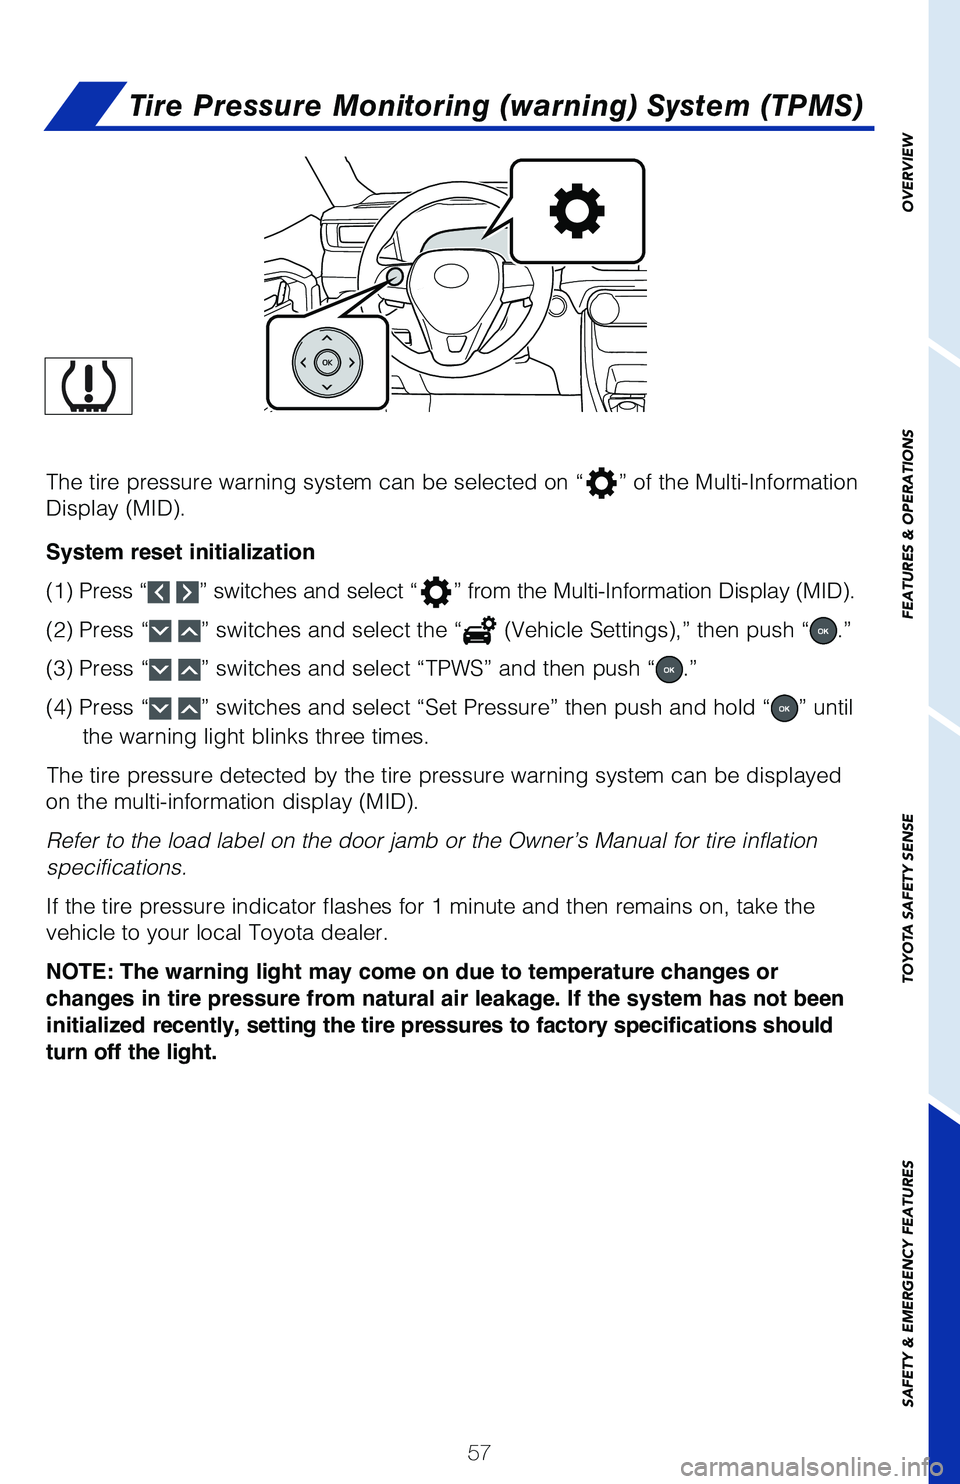 TOYOTA RAV4 2021  Owners Manual (in English) 57
OVERVIEW
FEATURES & OPERATIONS
TOYOTA SAFETY SENSE
SAFETY & EMERGENCY FEATURES
Tire Pressure Monitoring (warning) System (TPMS)
The tire pressure warning system can be selected on “”  of the Mu